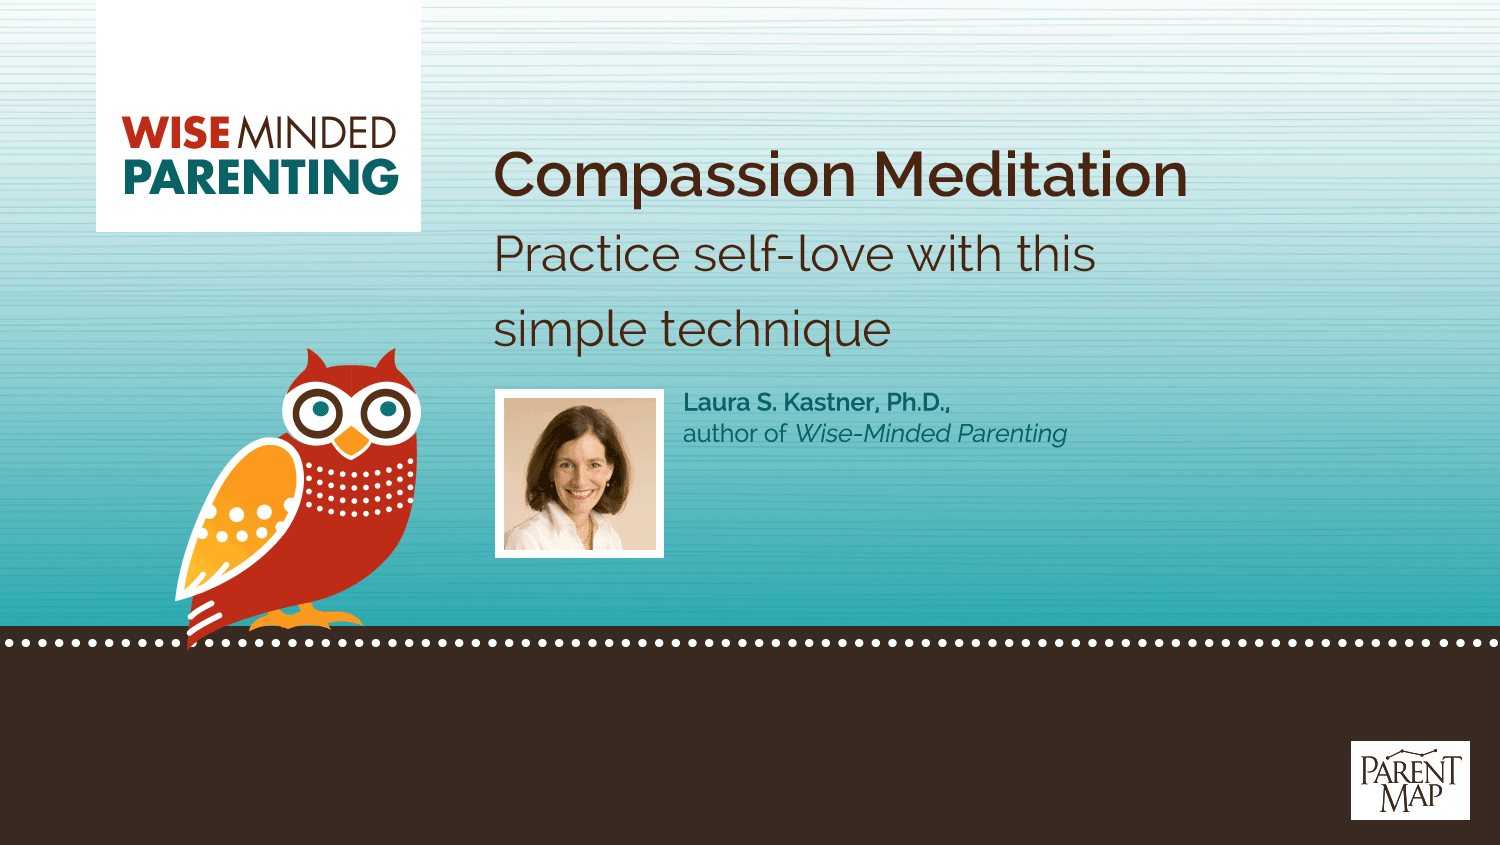 Compassion Meditation: Practice self-love with this simple technique